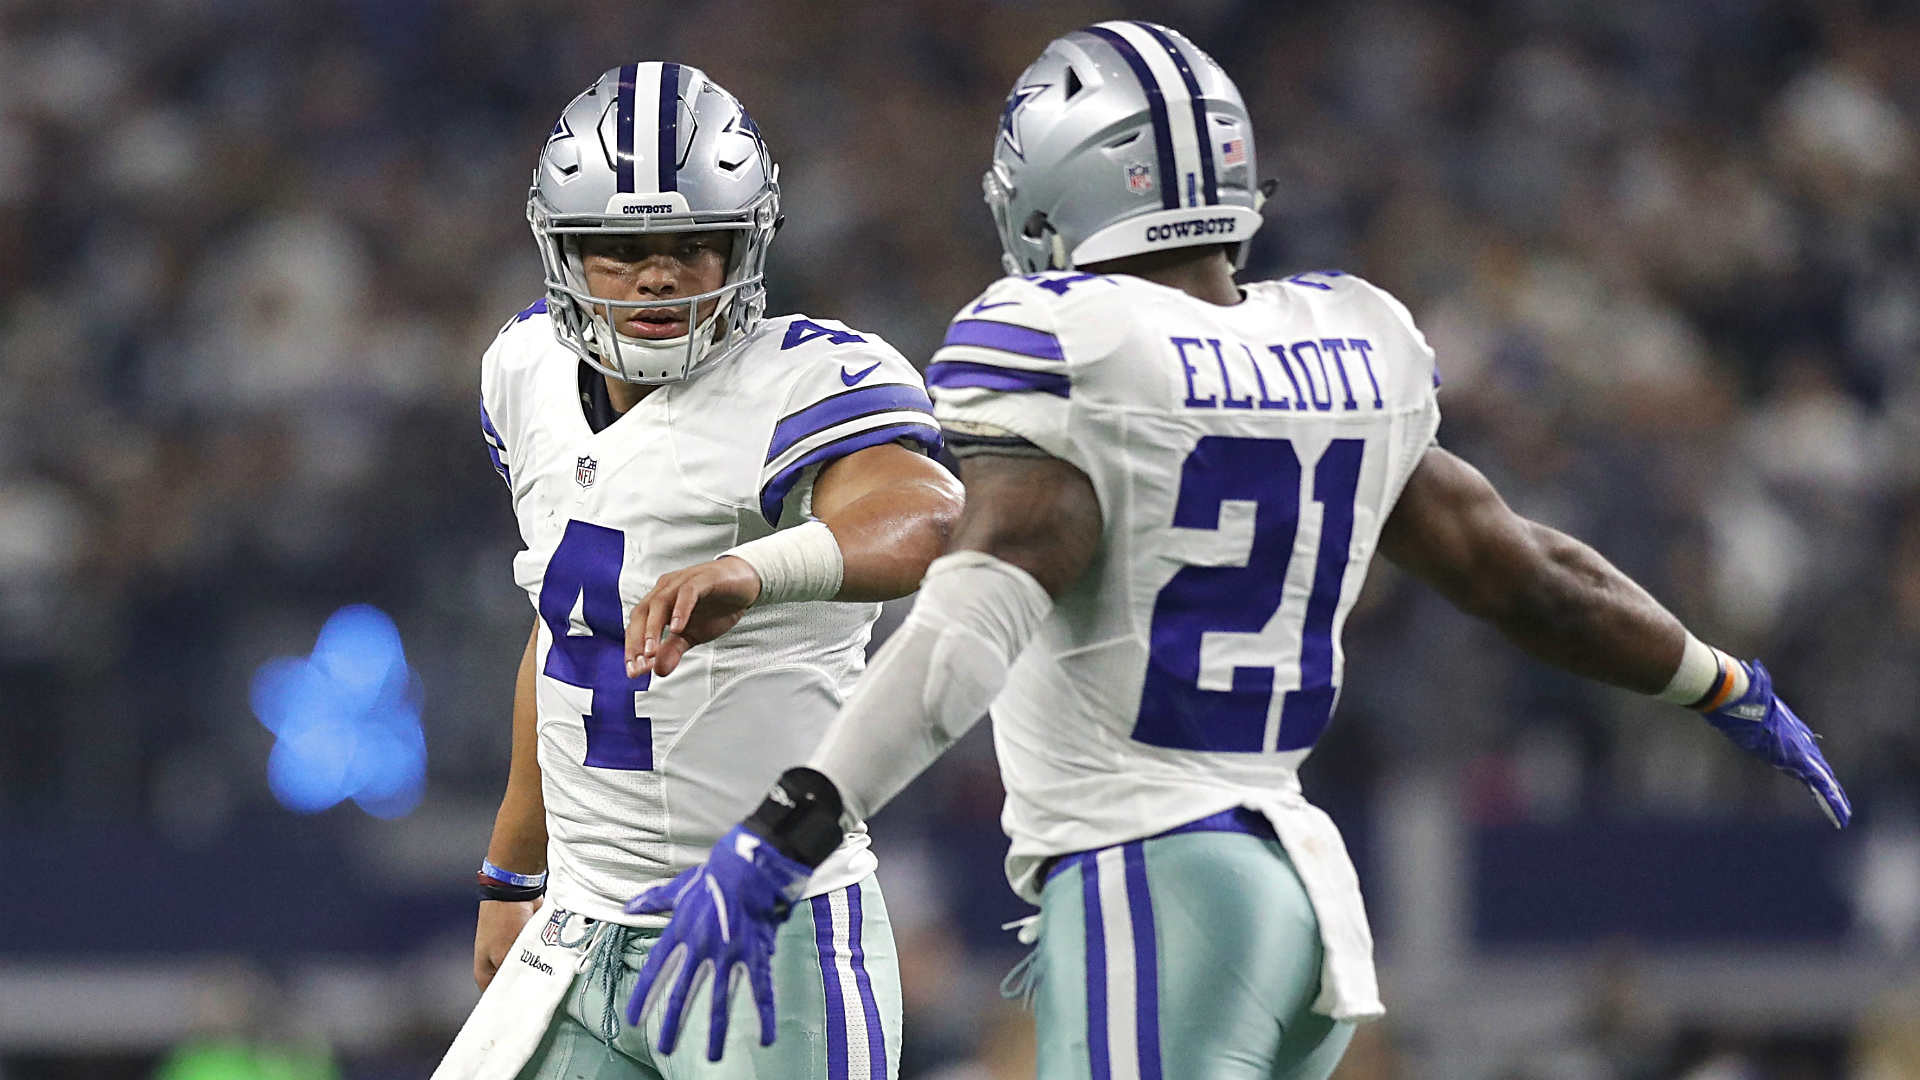 1920x1080 Cowboys offense adjusting to life after Dez Bryant, Jason Witten